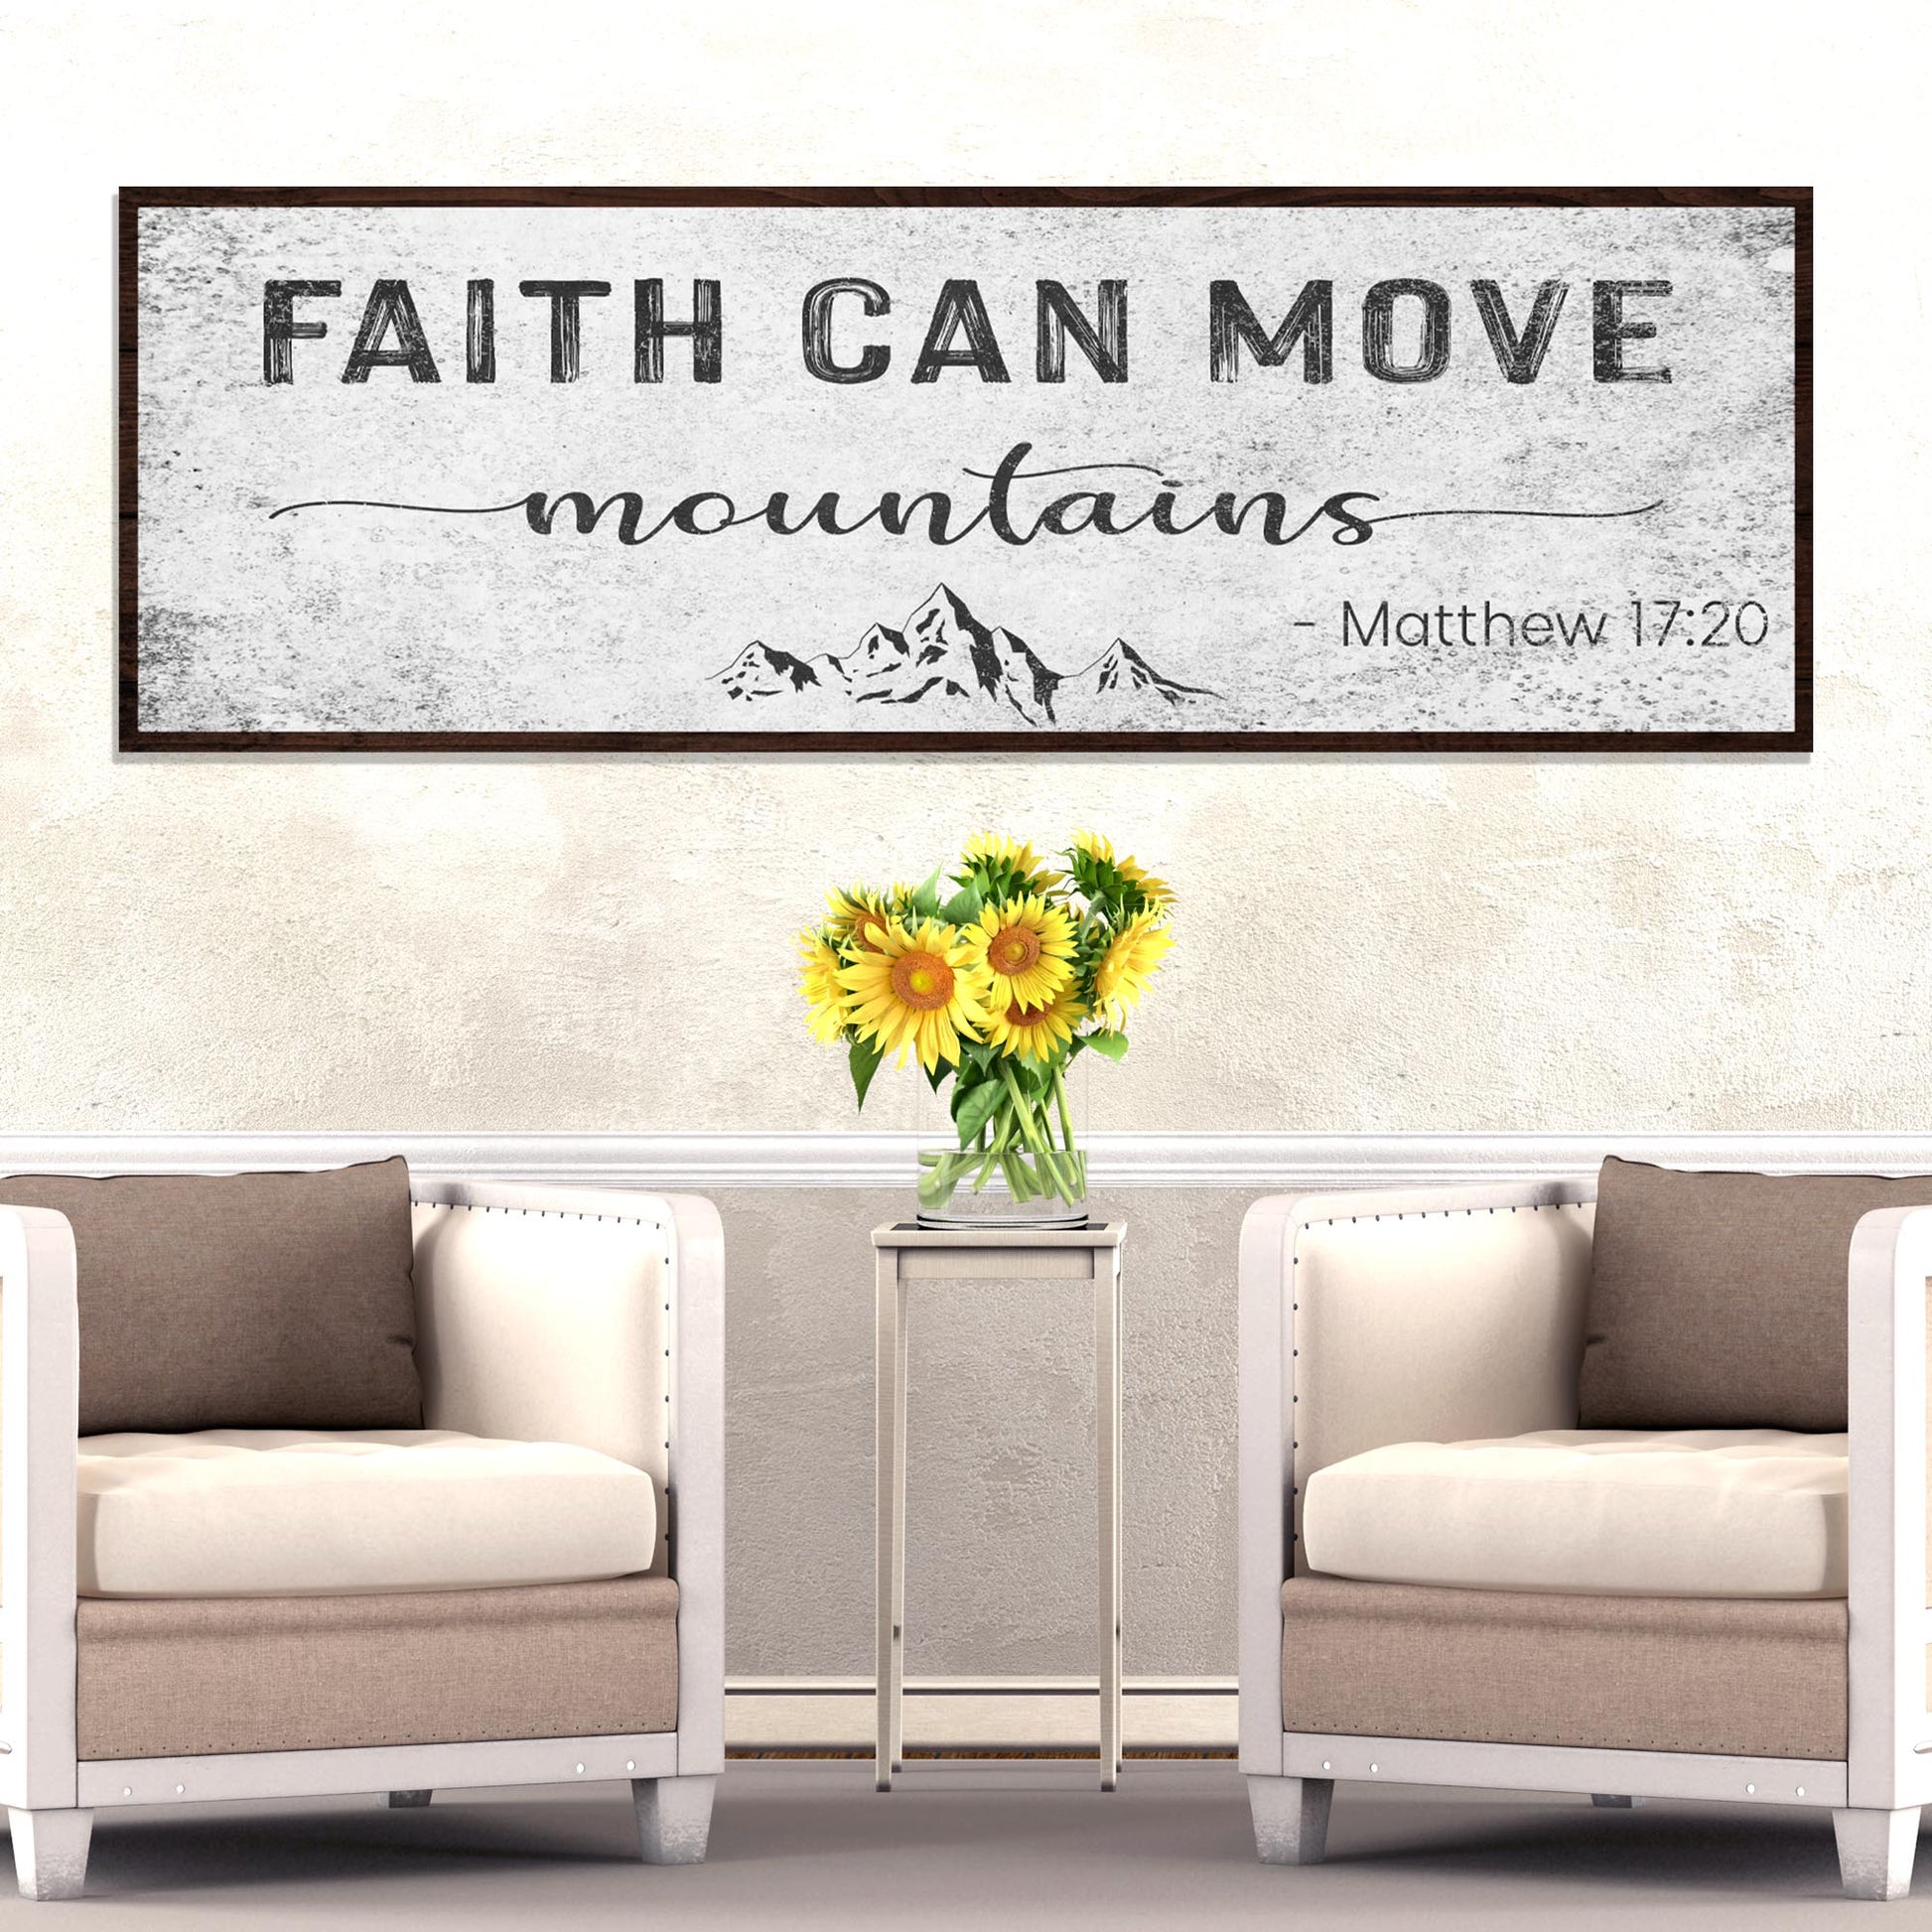 Matthew 17:20 - Faith Can Move Mountains Sign - Image by Tailored Canvases